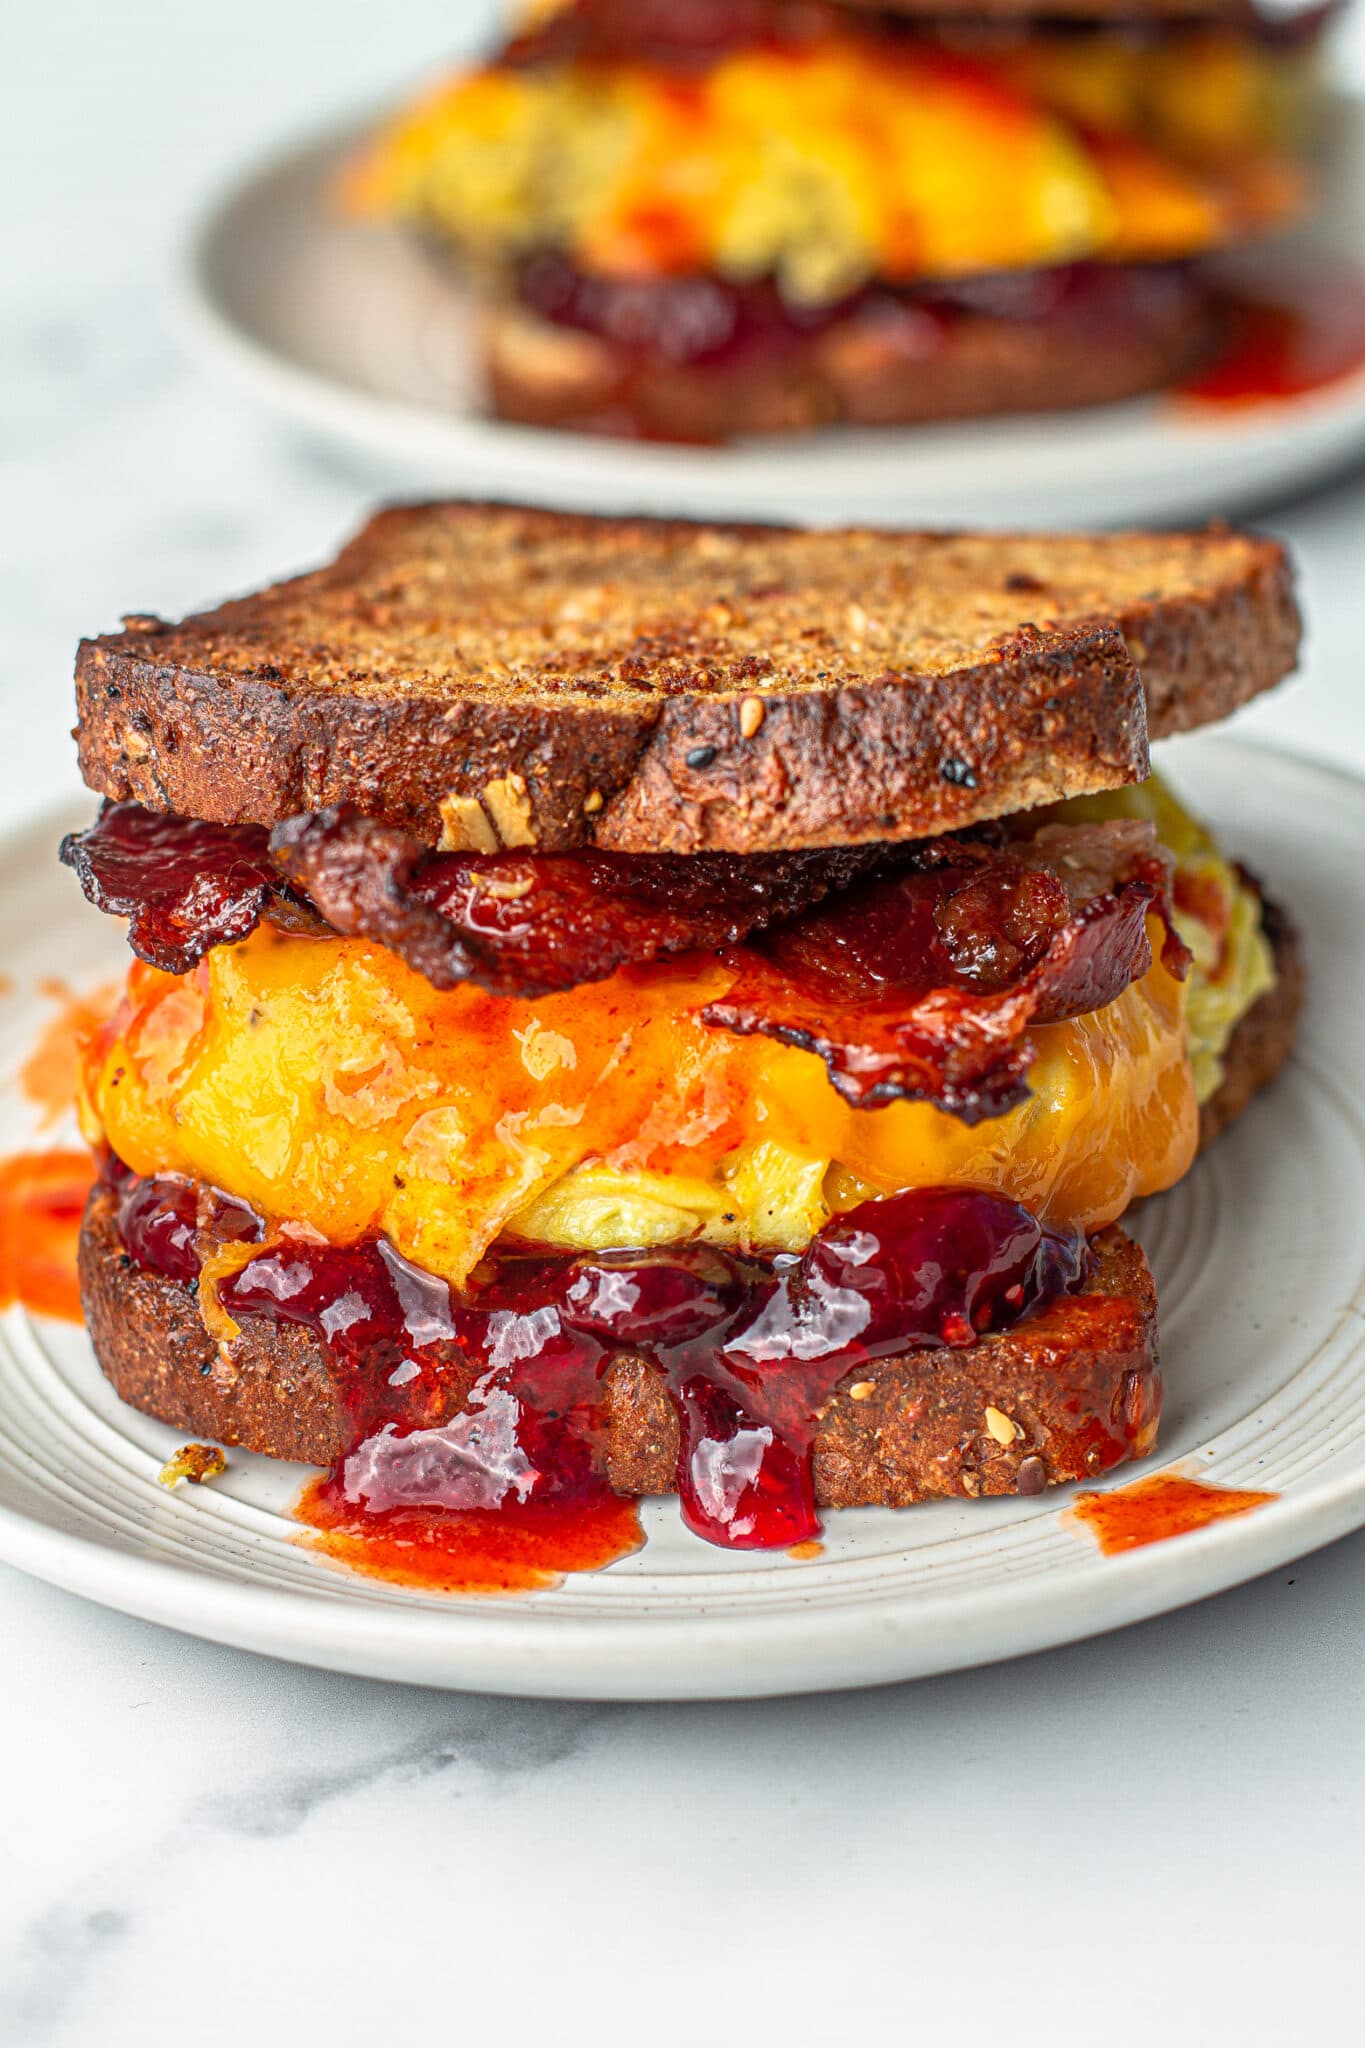 Bacon Egg and Cheese Sandwich Recipe | Meiko and The Dish